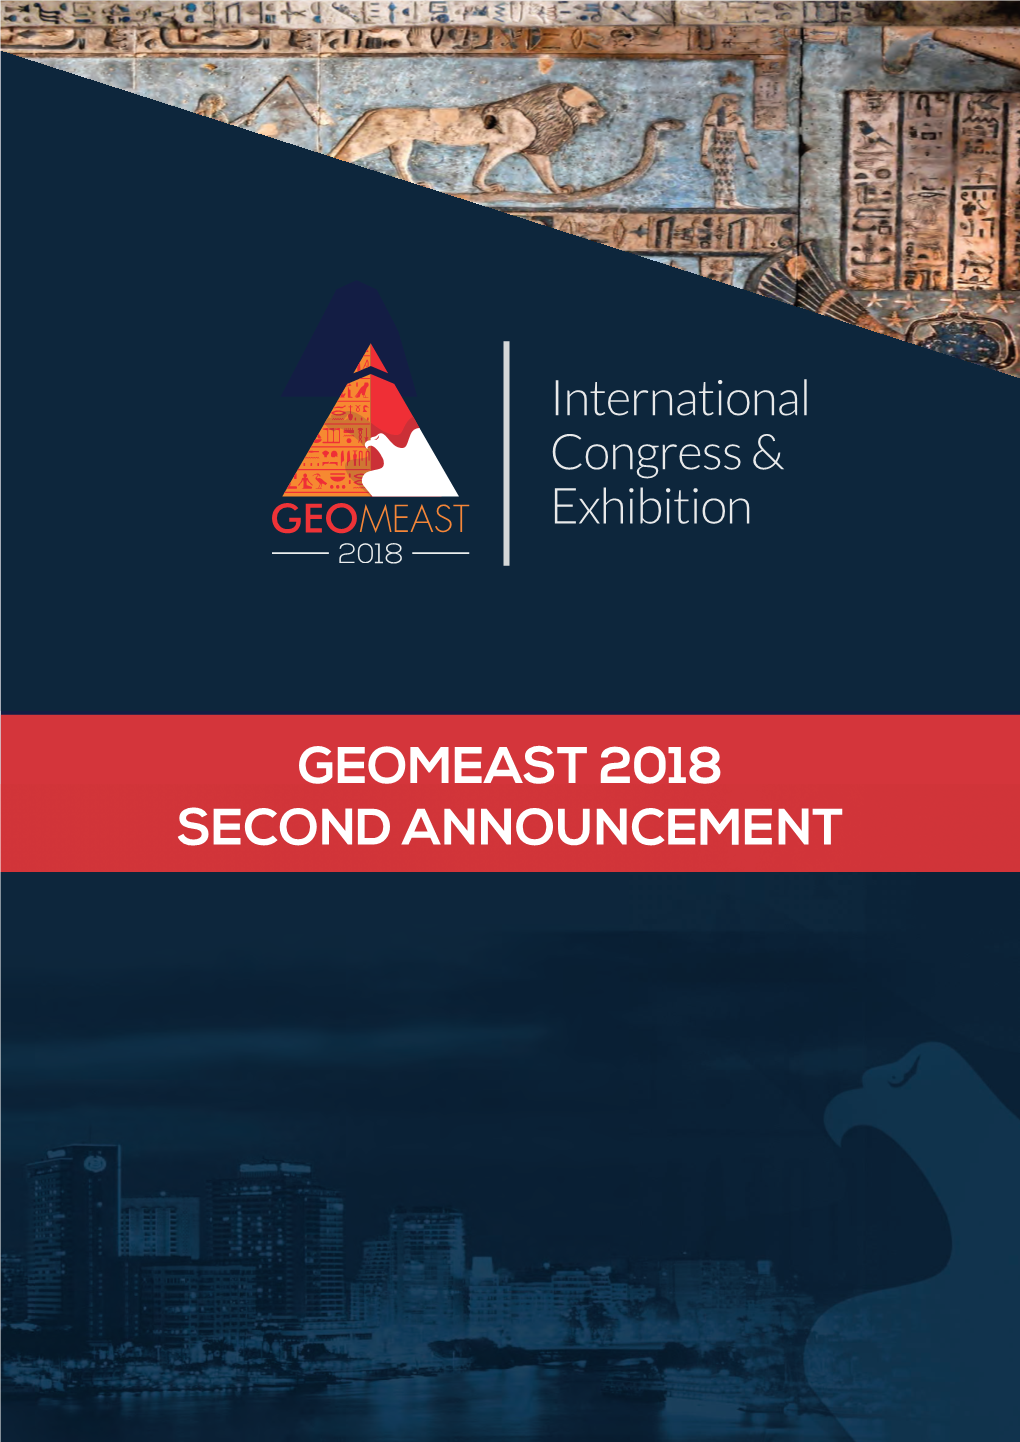 GEOMEAST 2018 SECOND ANNOUNCEMENT “Think of It, Soldiers; from the Summit of These Pyramids, Forty Centuries Look Down Upon You” - Napoleon Bonaparte WELCOME MESSAGE